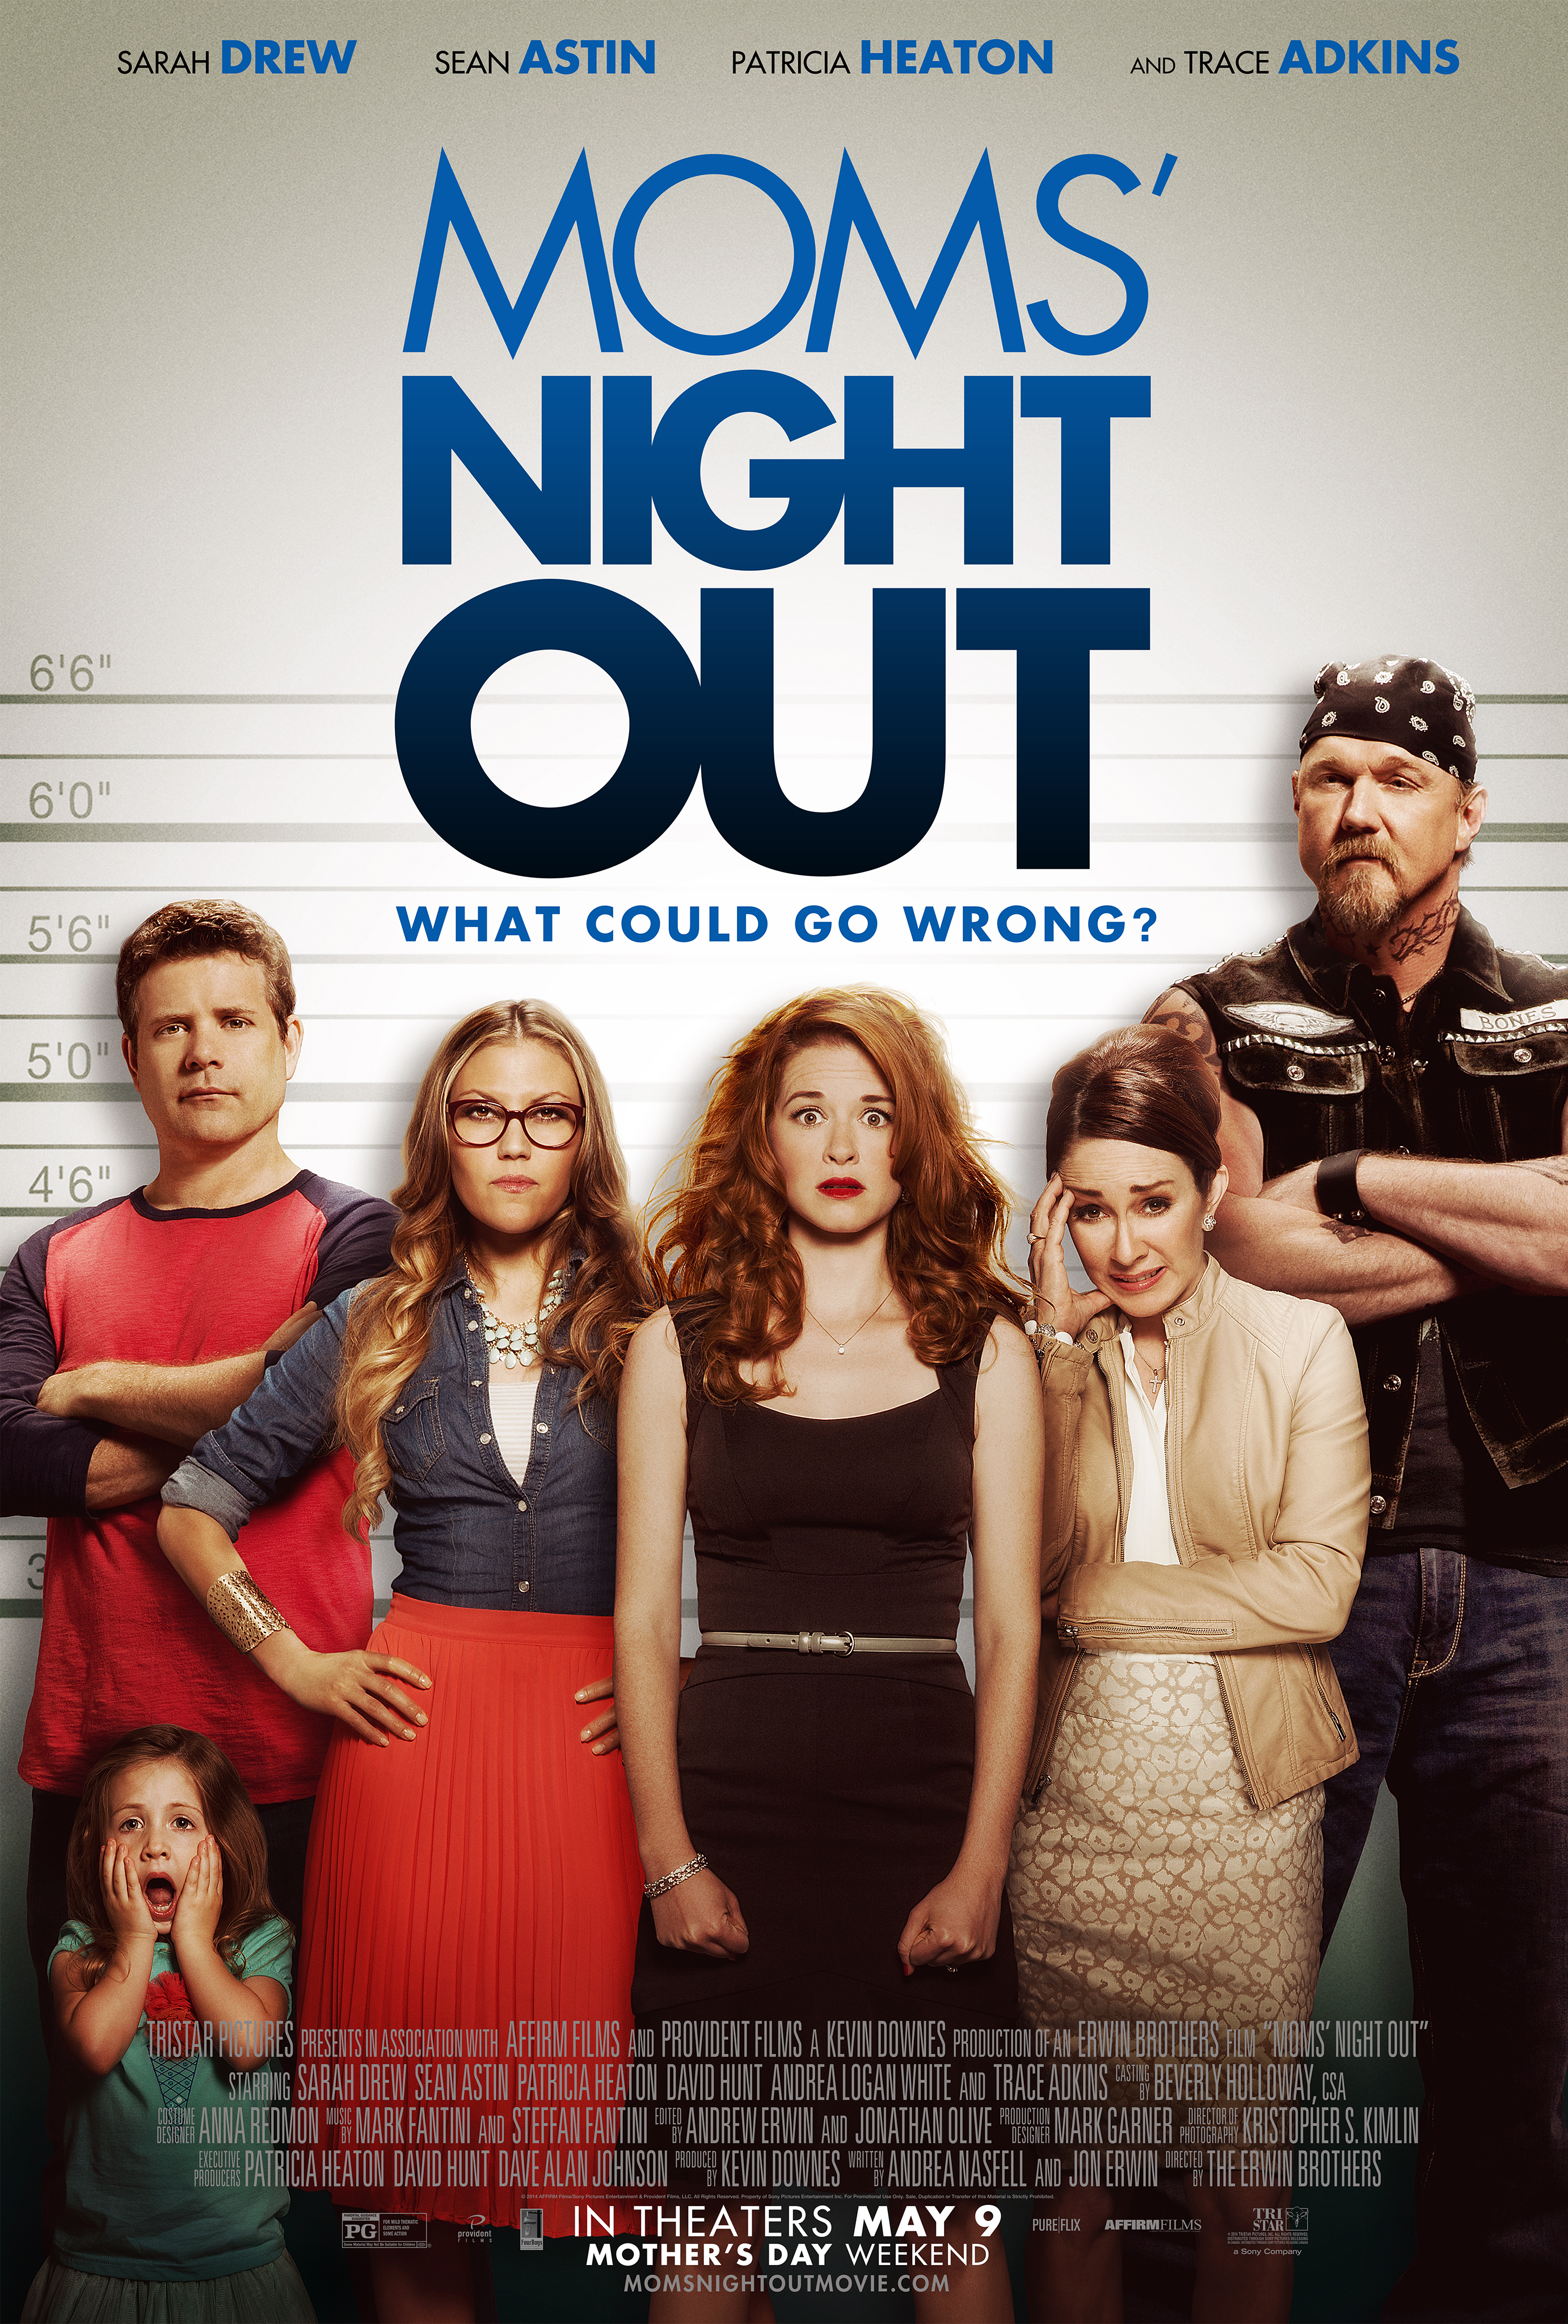 angelica corpin recommends Moms Night Out Xxx